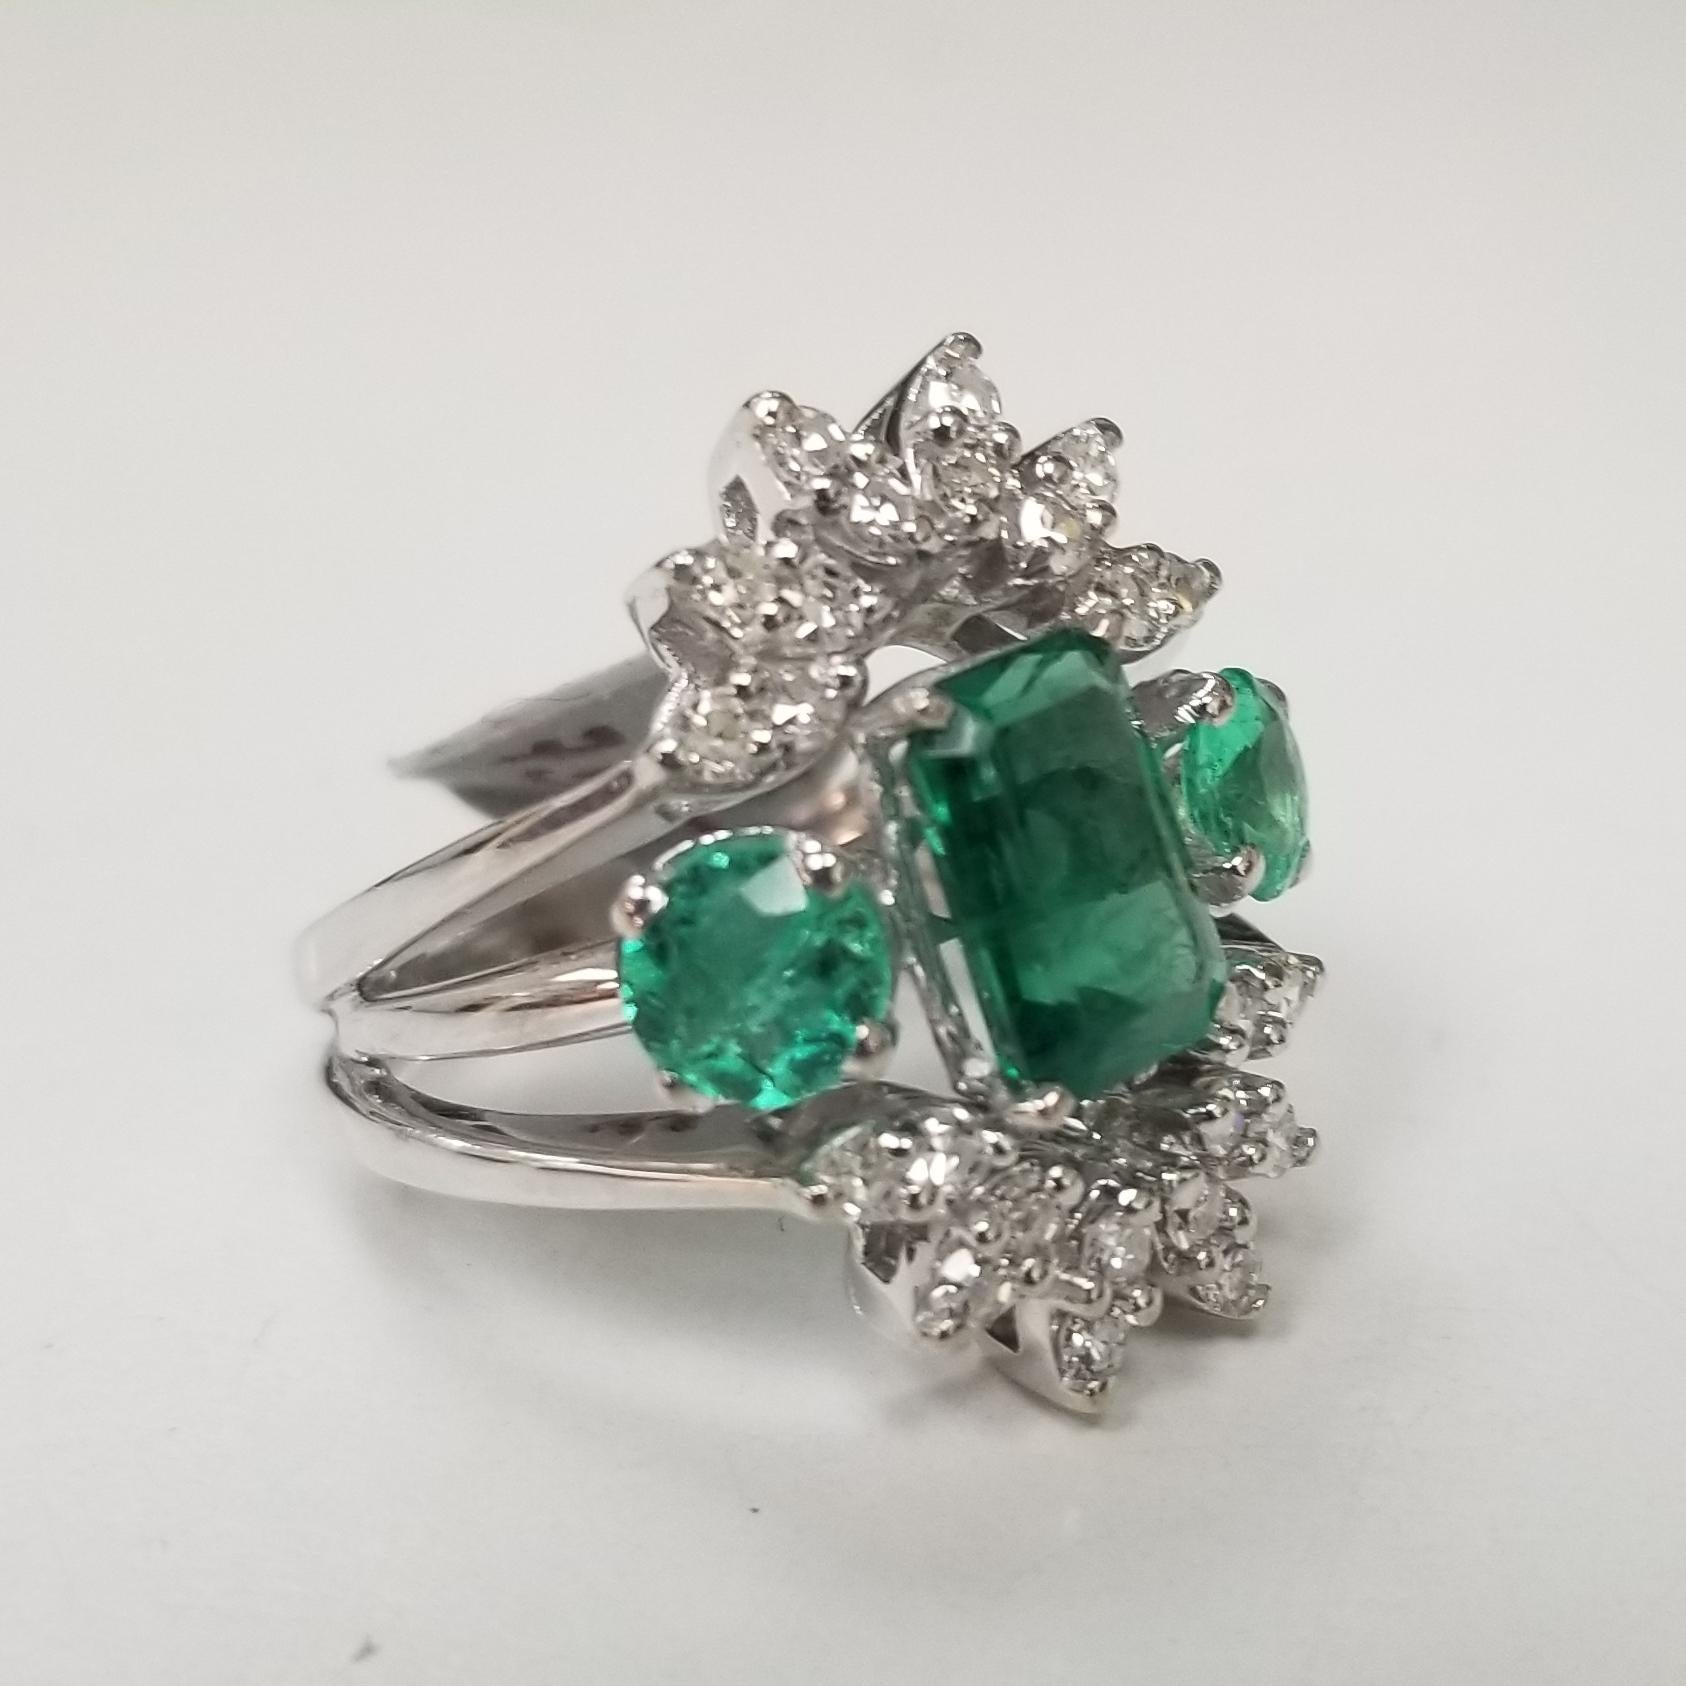 This is a vintage 14k white gold Colombian emerald and diamond ring. The center stone is approximately 1.40 carat weight with a fine medium color and good clarity. There are approximately 0.60 carat total weight of round emeralds on both sides of